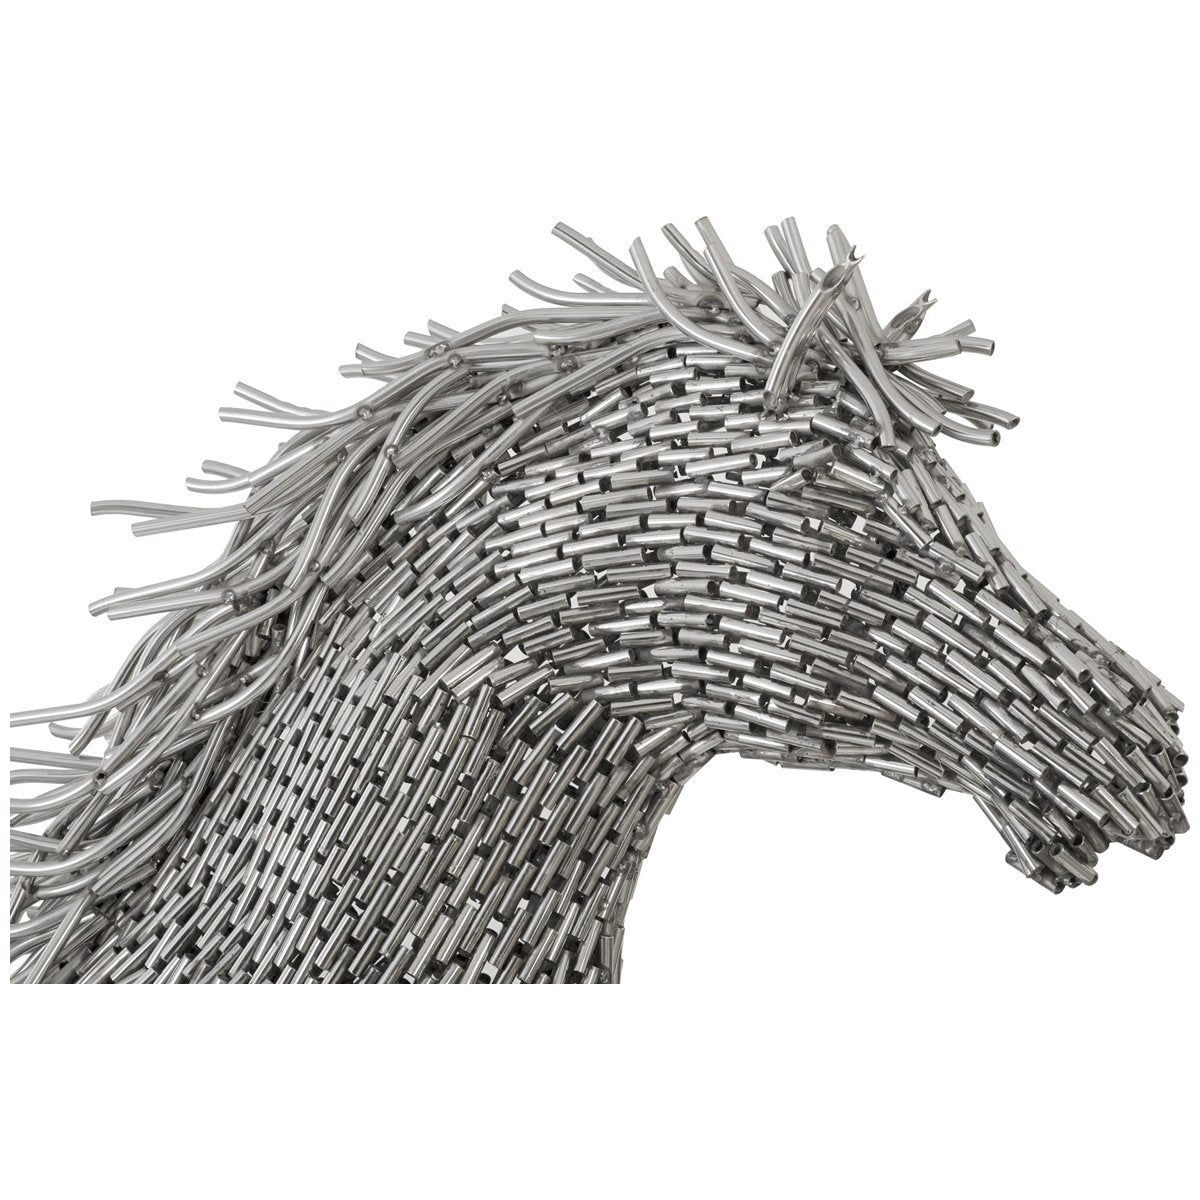 Phillips Collection Horse Pipe Sculpture, Galloping